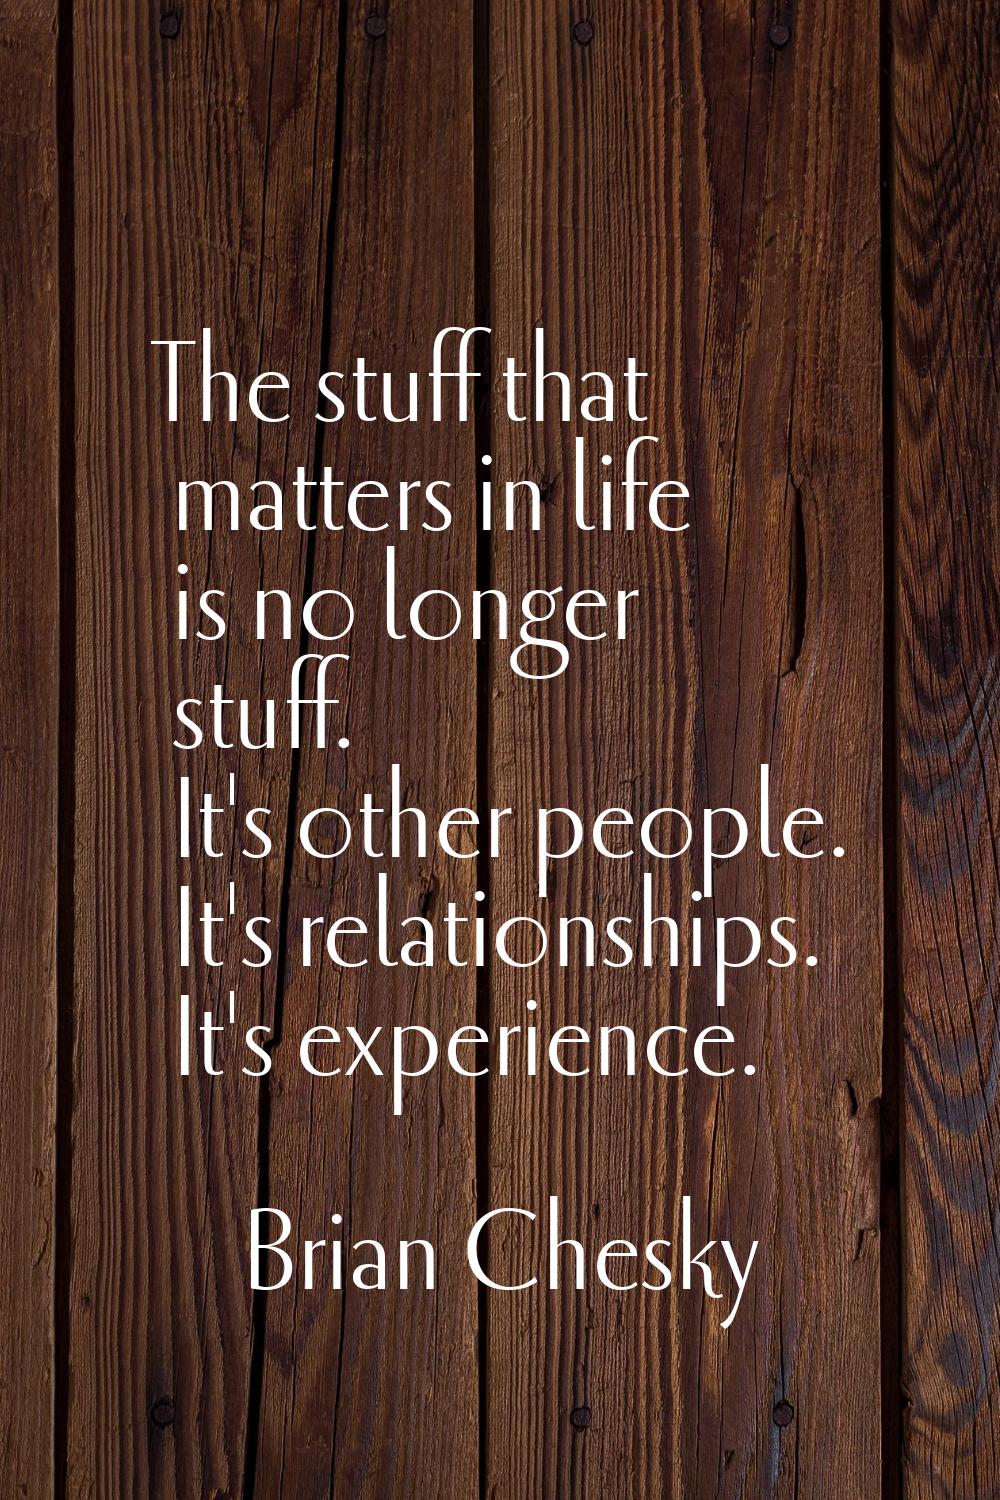 The stuff that matters in life is no longer stuff. It's other people. It's relationships. It's expe